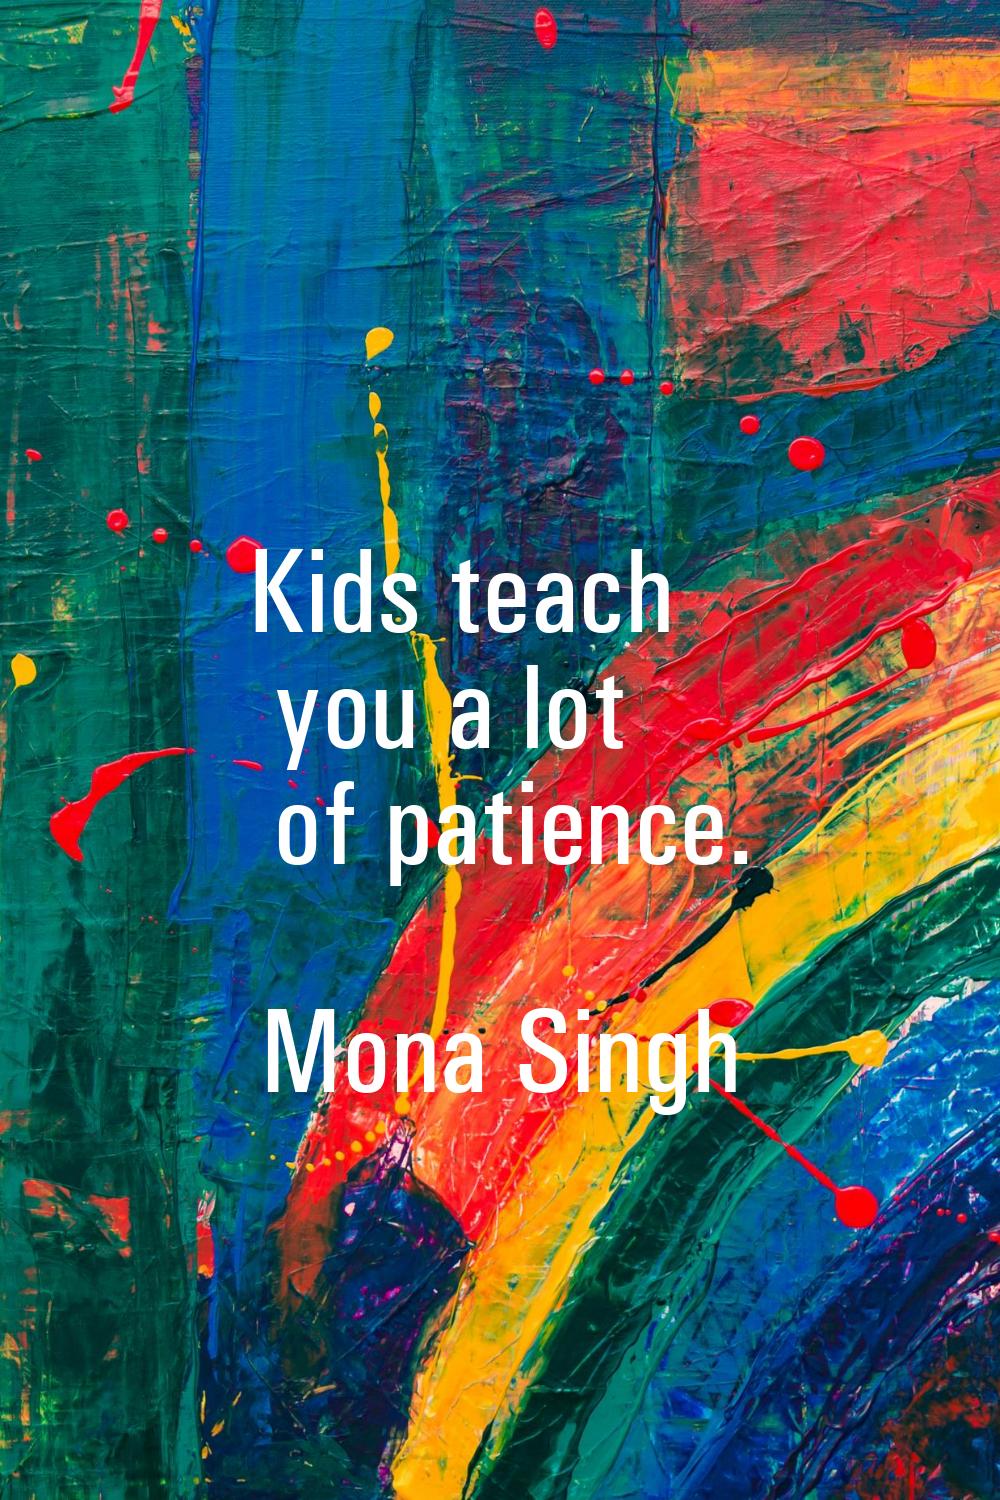 Kids teach you a lot of patience.